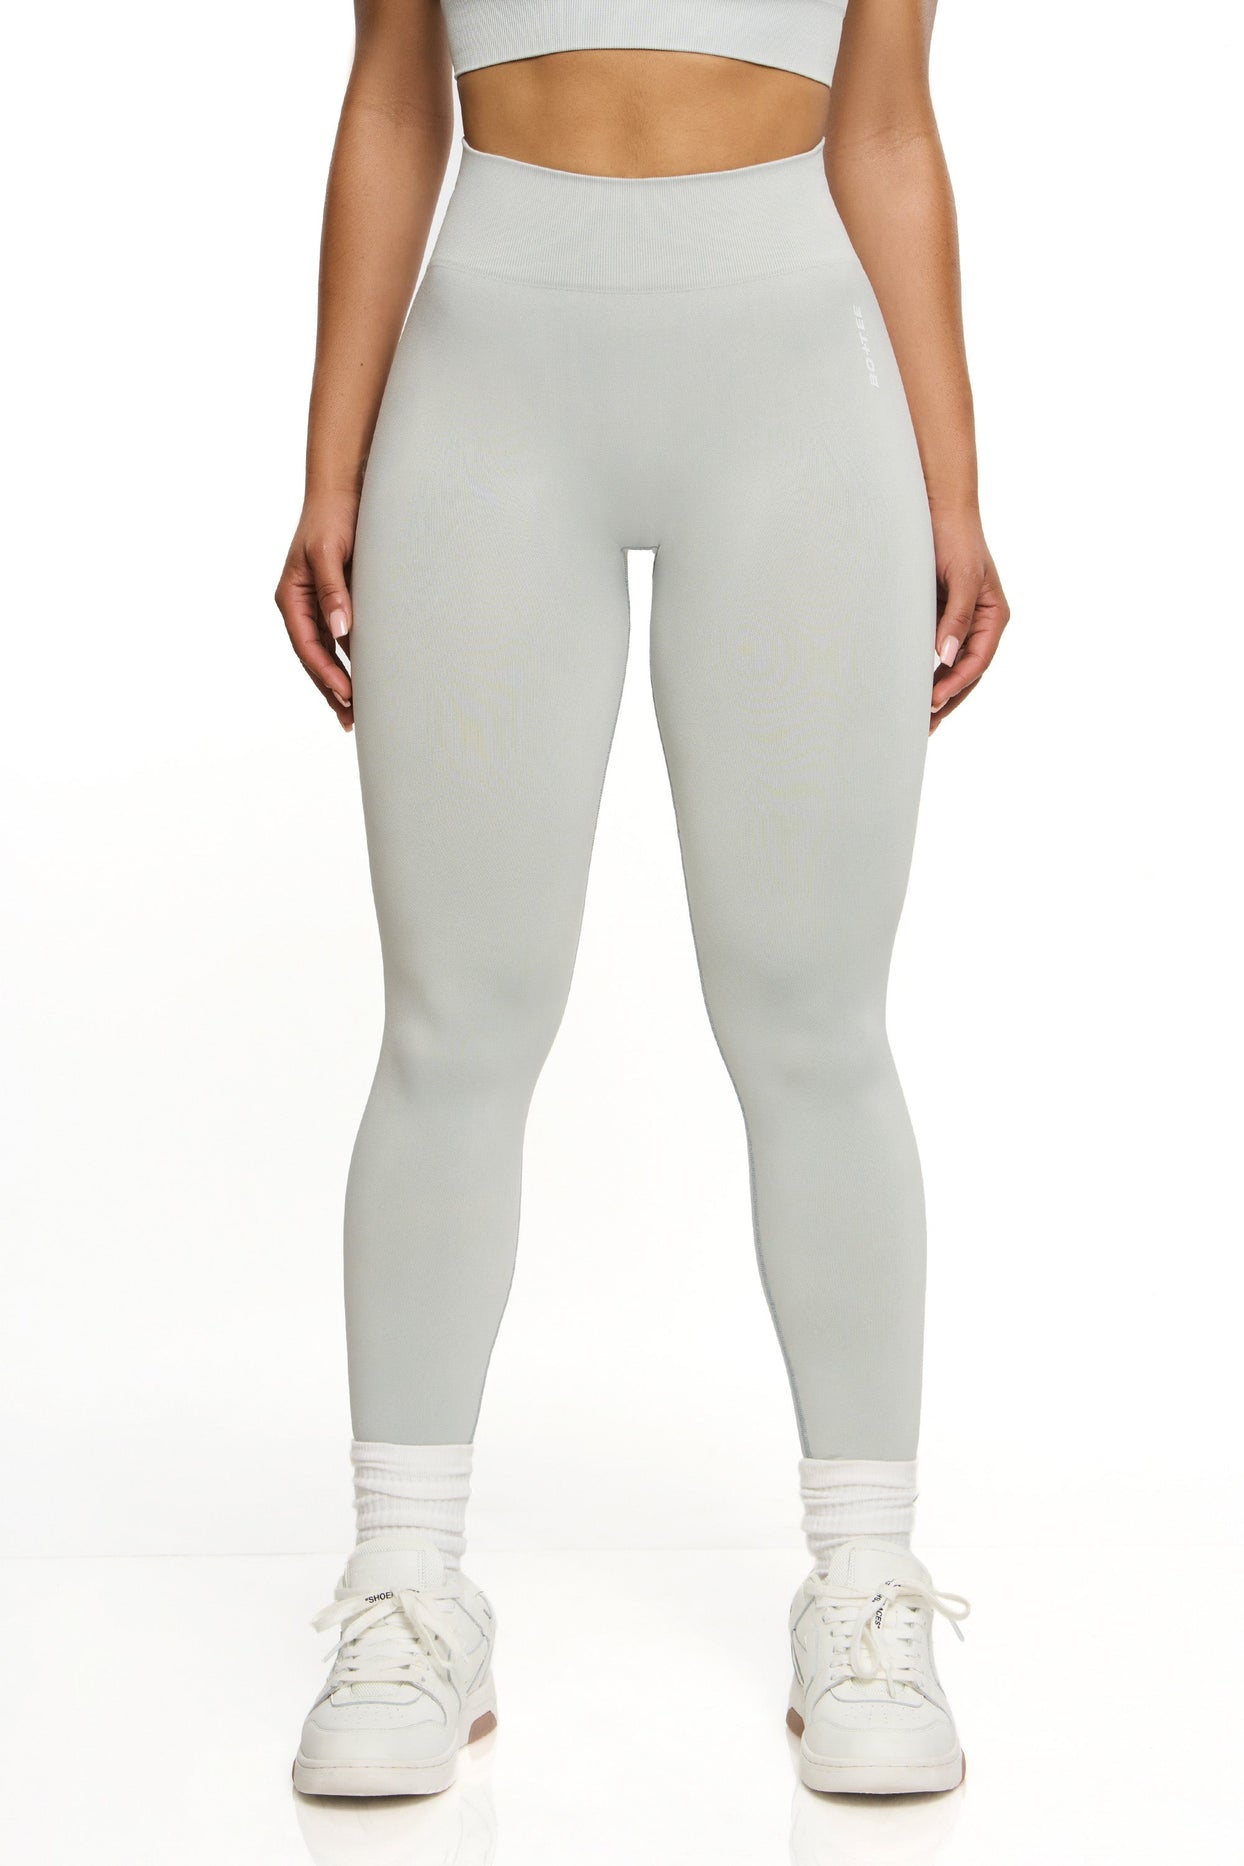 https://us.ohpolly.com/cdn/shop/products/BT0466_2_Grey-High-Waisted-Sports-Leggings_42beee5c-cbc6-49aa-81ca-f0ecfd196eac.jpg?v=1689266200&width=1244